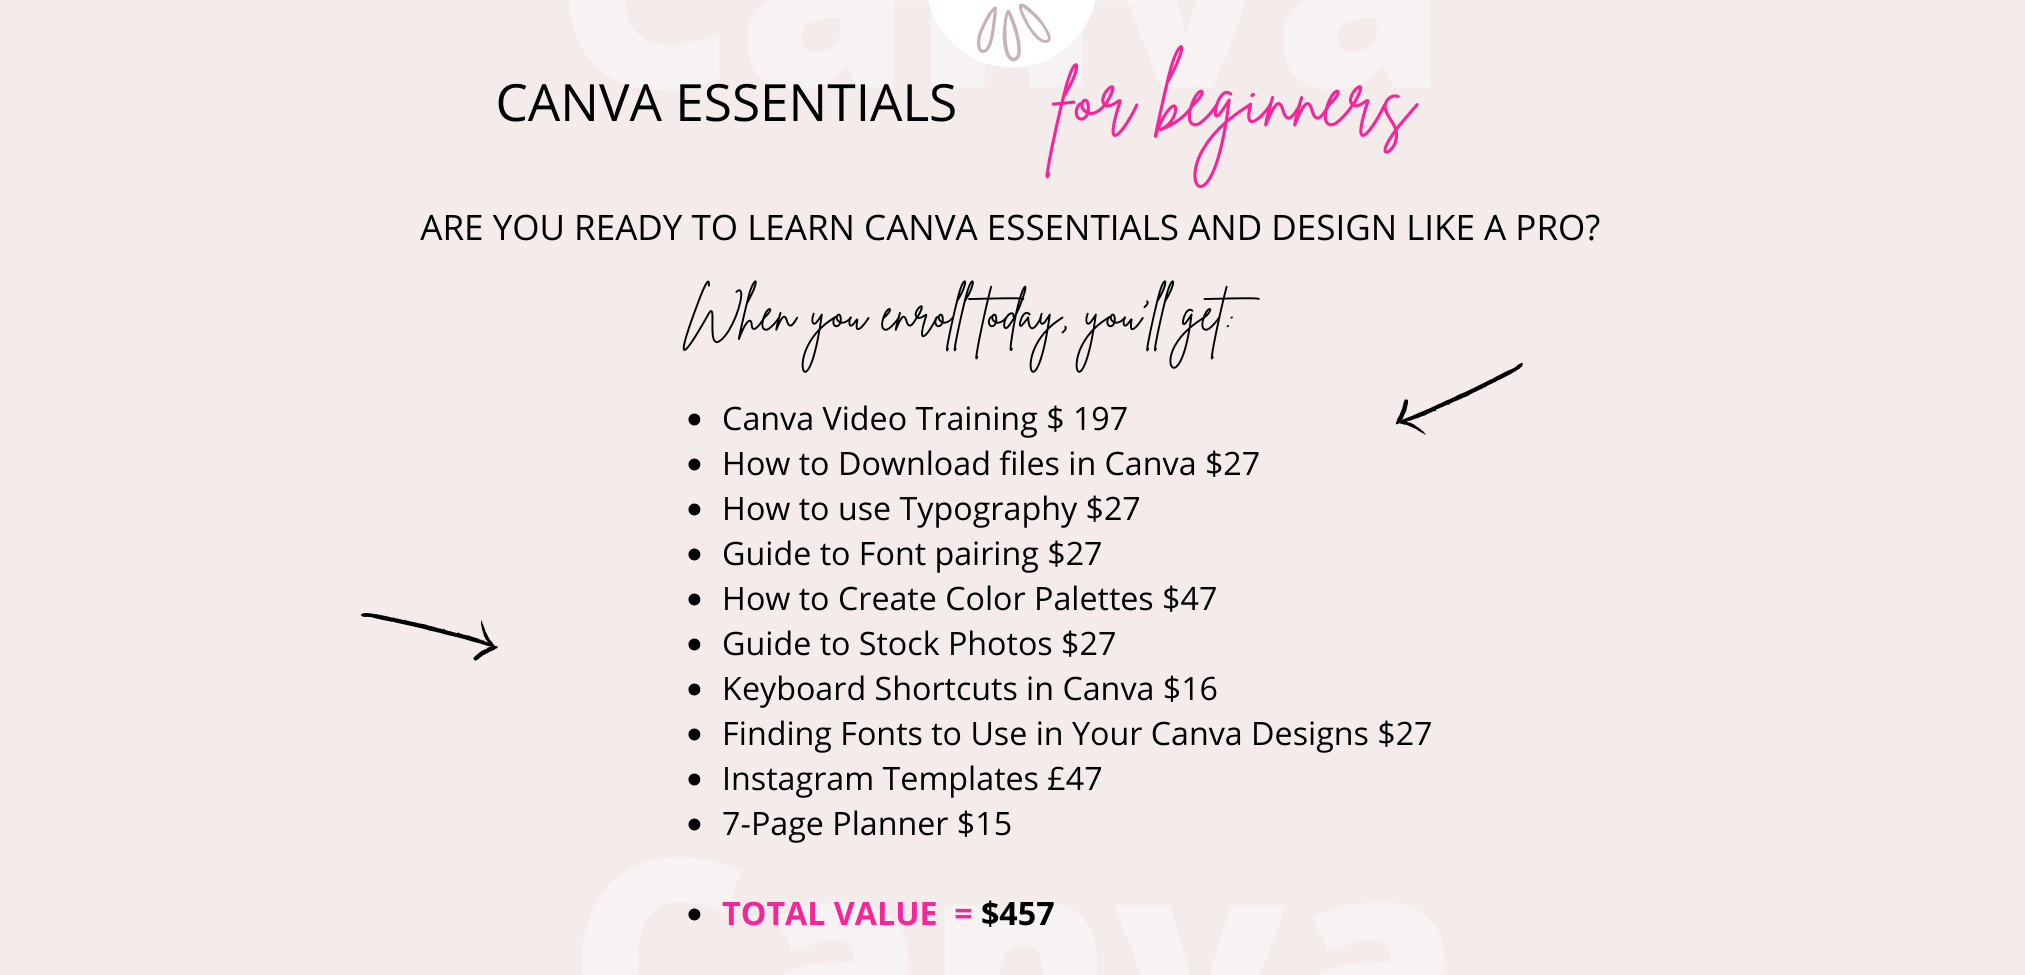 Canva essentials online course breakdown of prices the step-by-step program to guide you through all the essentials you need even with zero design skills